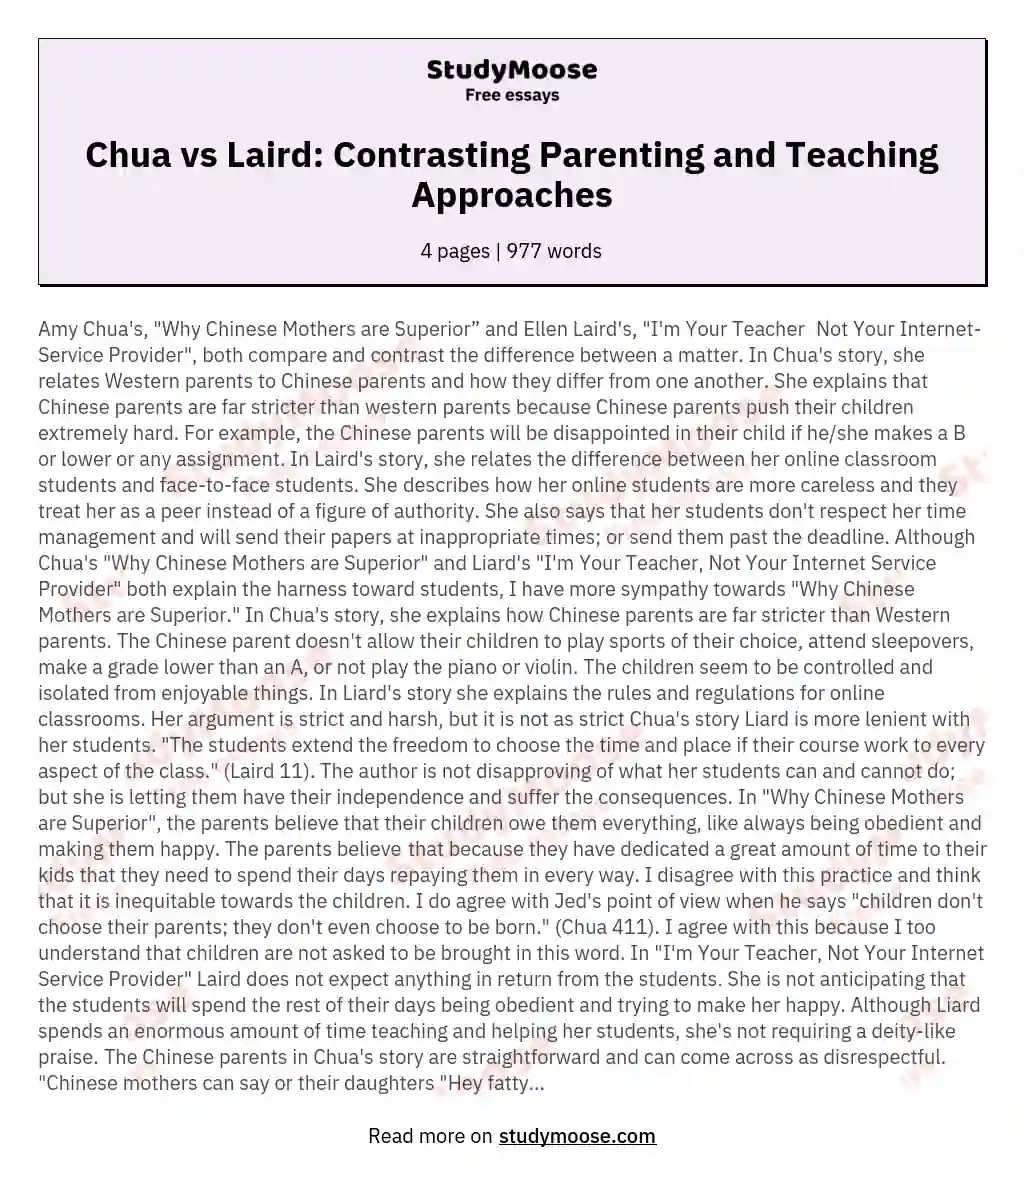 Chua vs Laird: Contrasting Parenting and Teaching Approaches essay